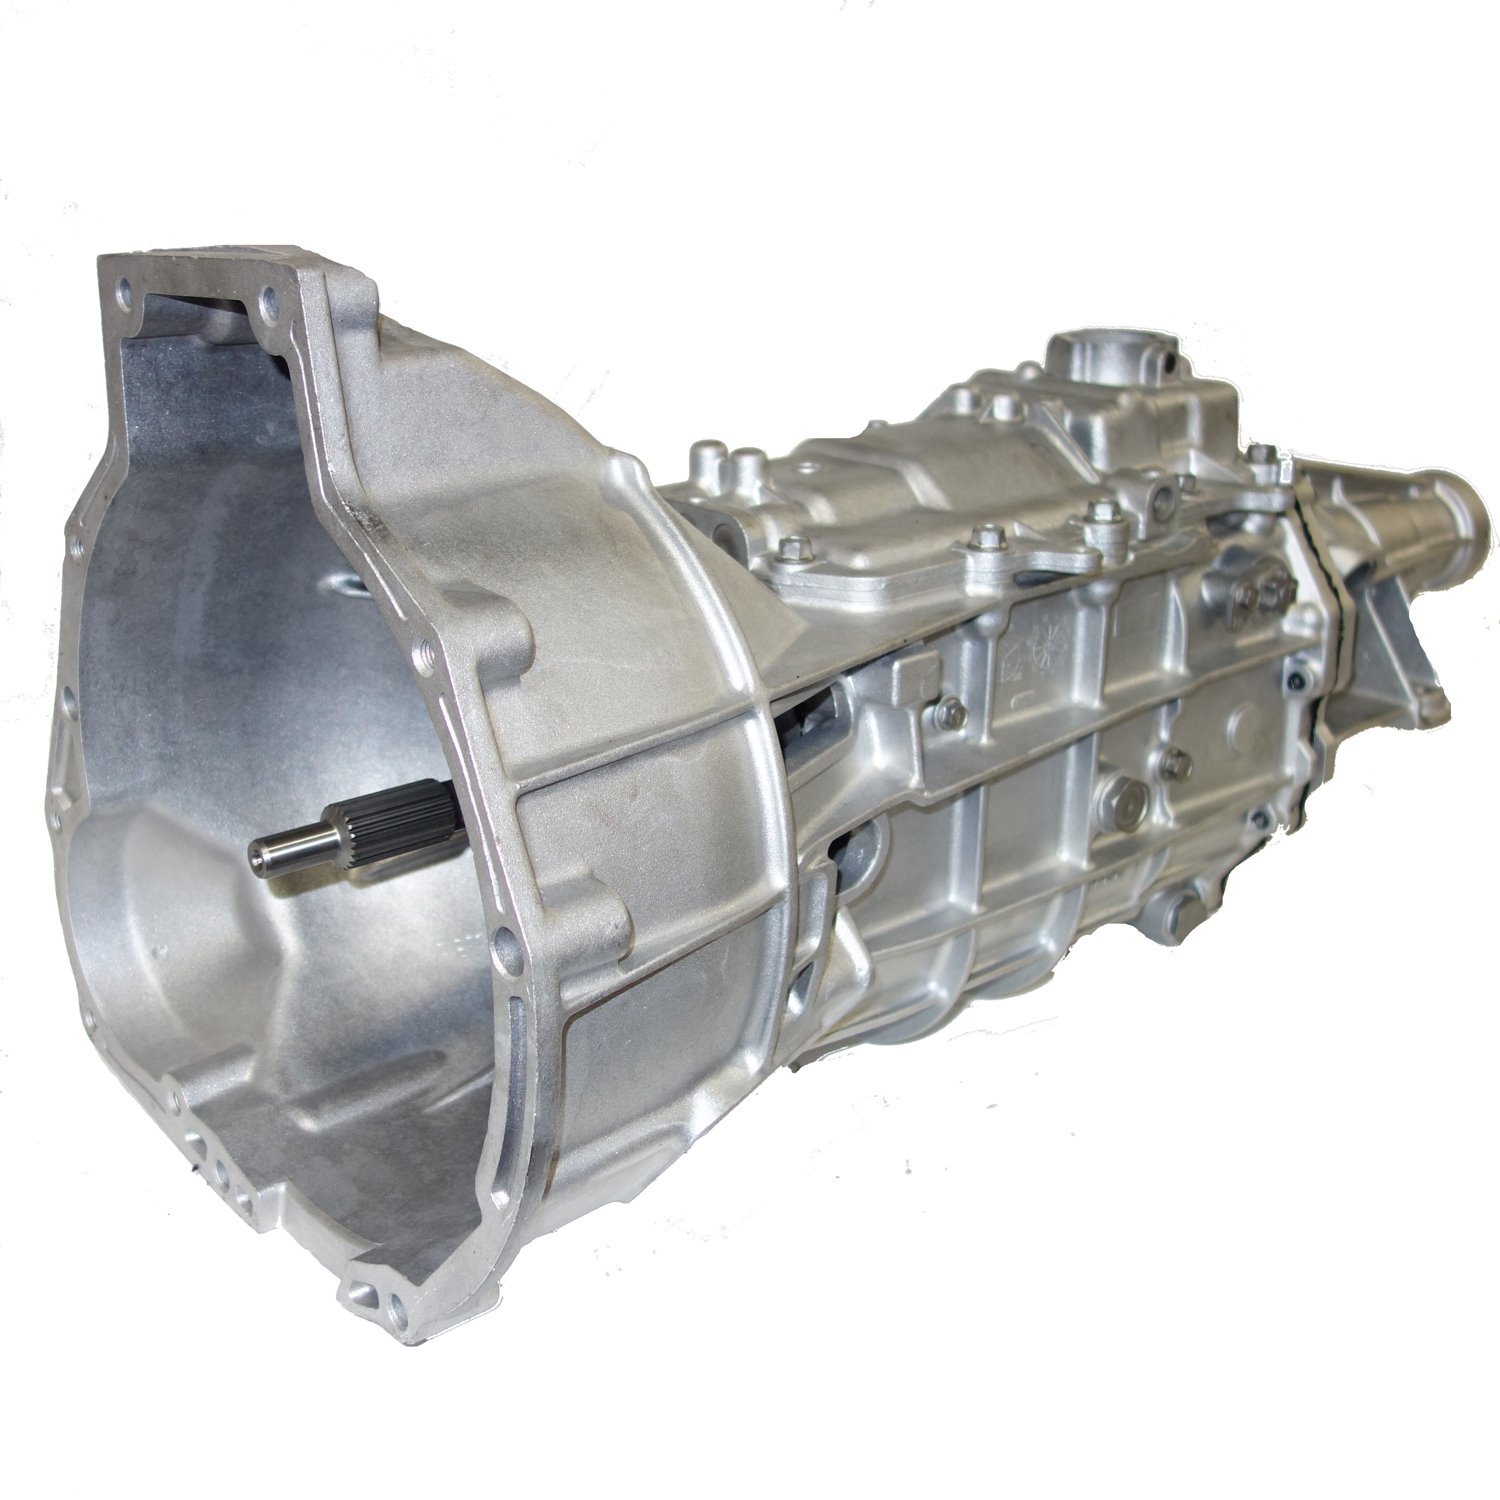 Remanufactured M5R1 Manual Transmission 1988-92 Ranger 2.9L, 2WD, 7 Tooth White Speedo Gear